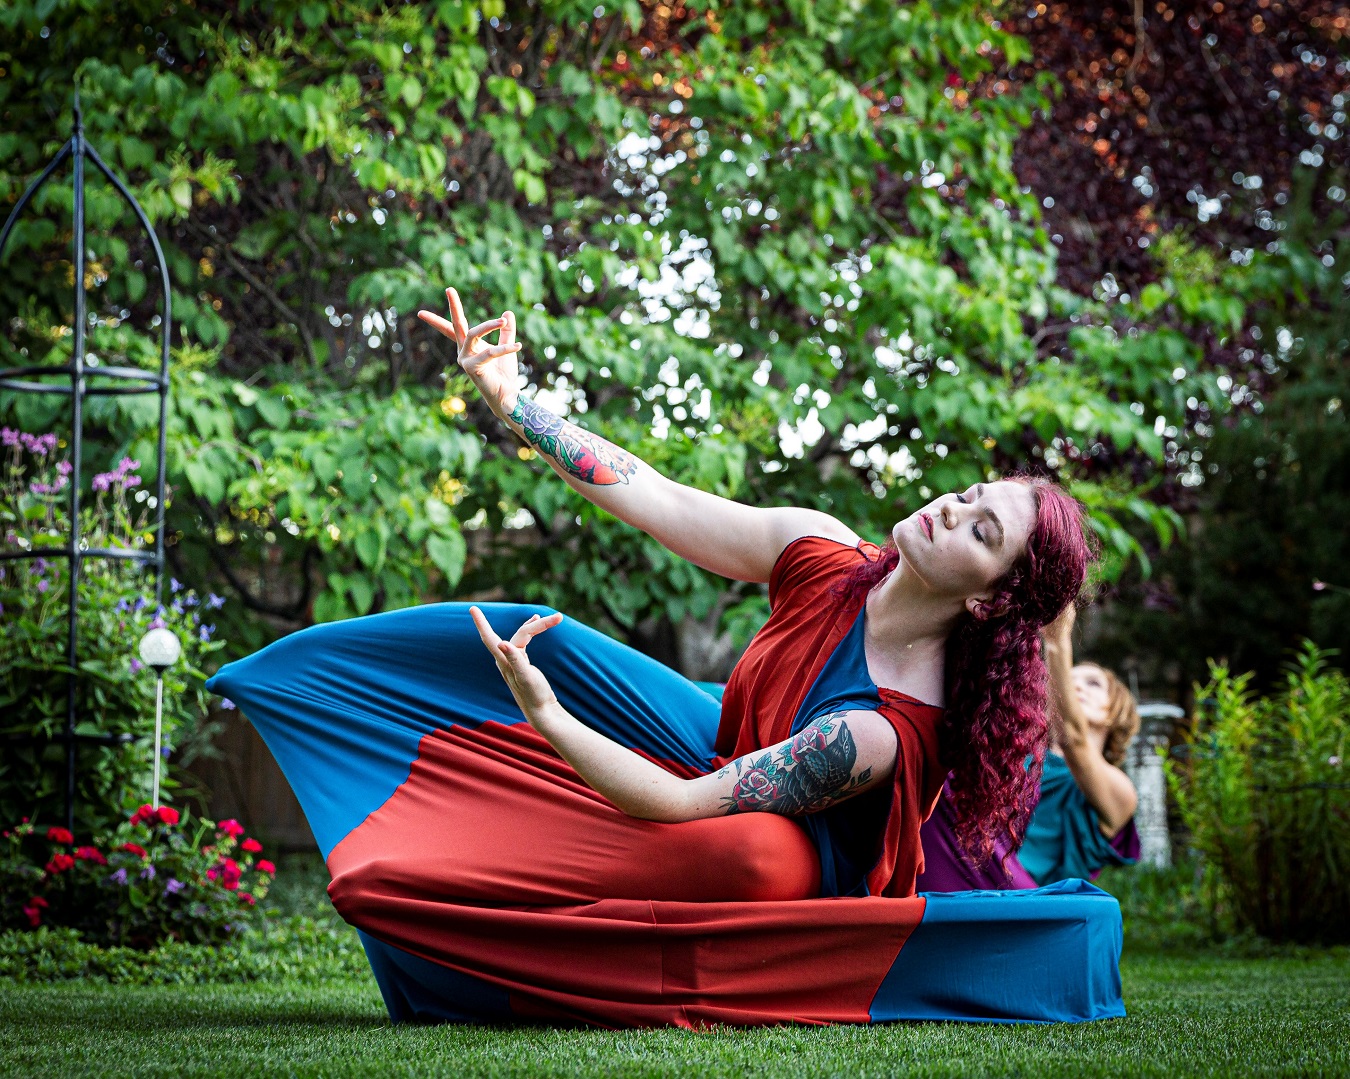 A woman wearing red and blue extends both of her arms while sitting on a trampoline.